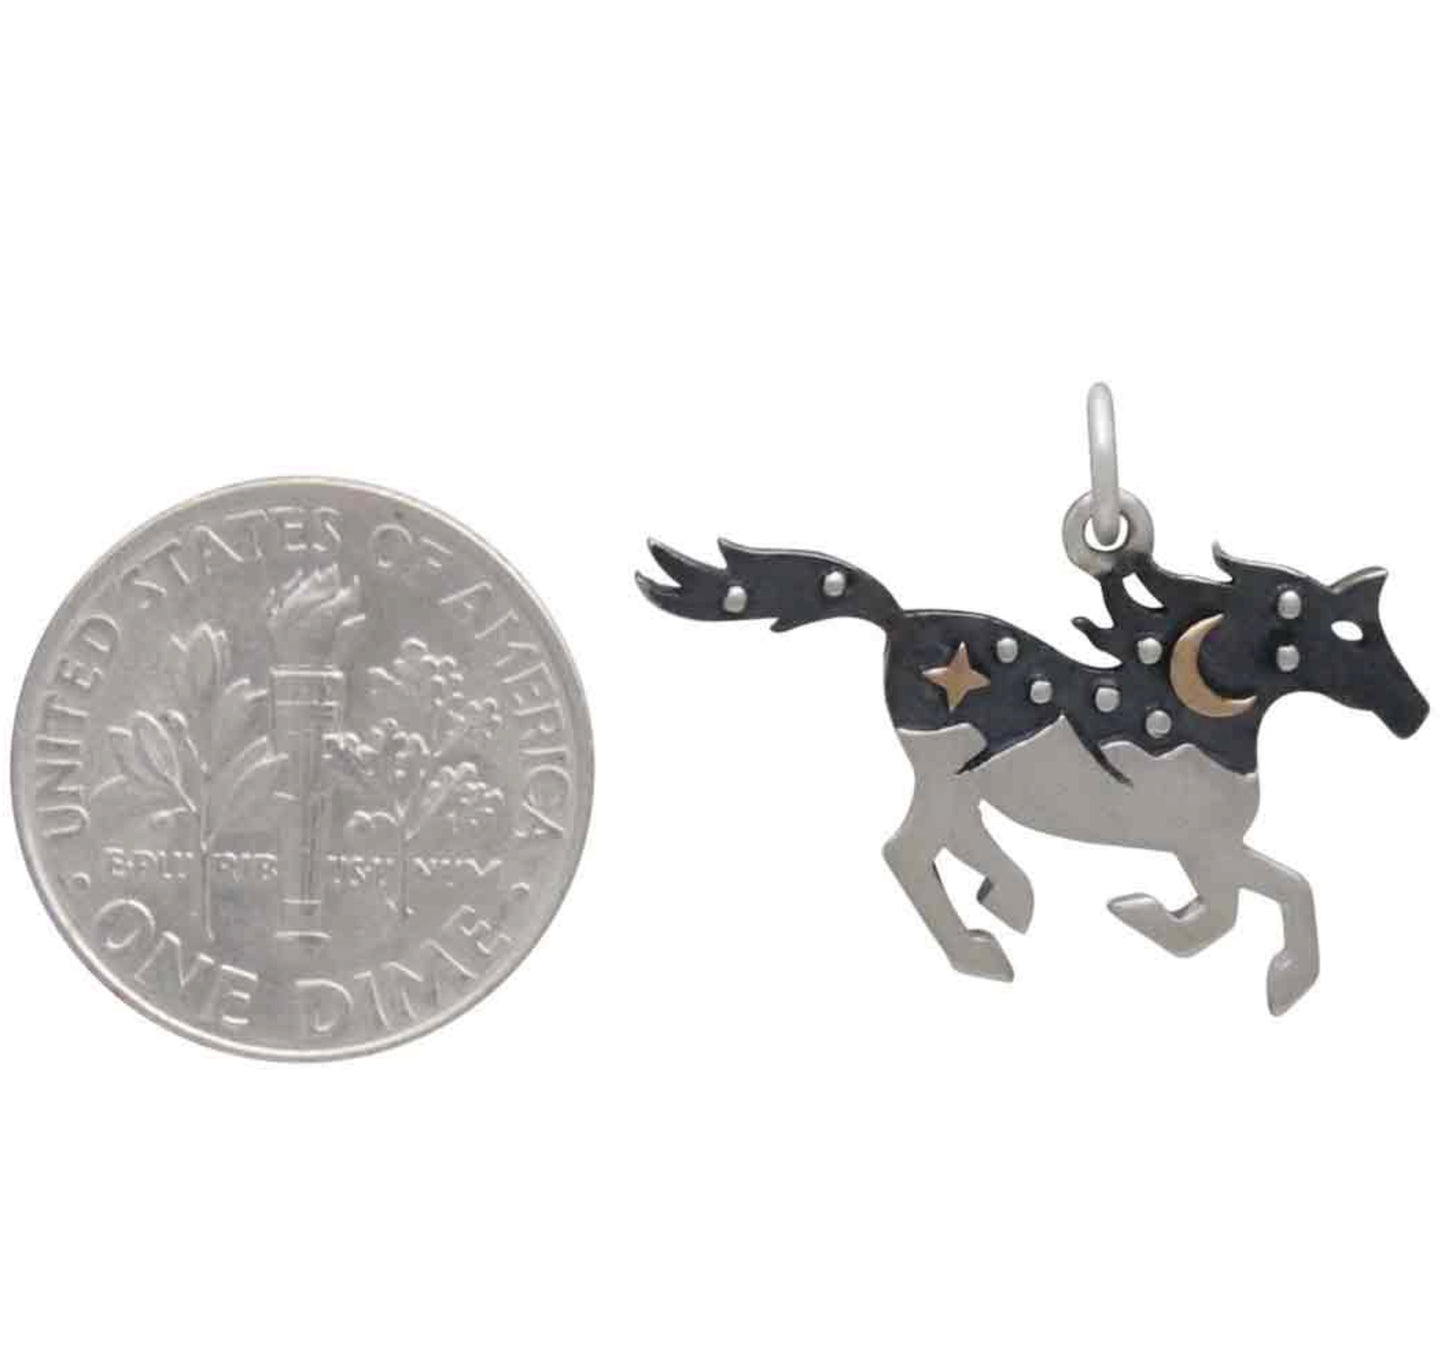 HANDCRAFTED STERLING SILVER HORSE CHARM WITH MOUNTAINS AND BRONZE MOON